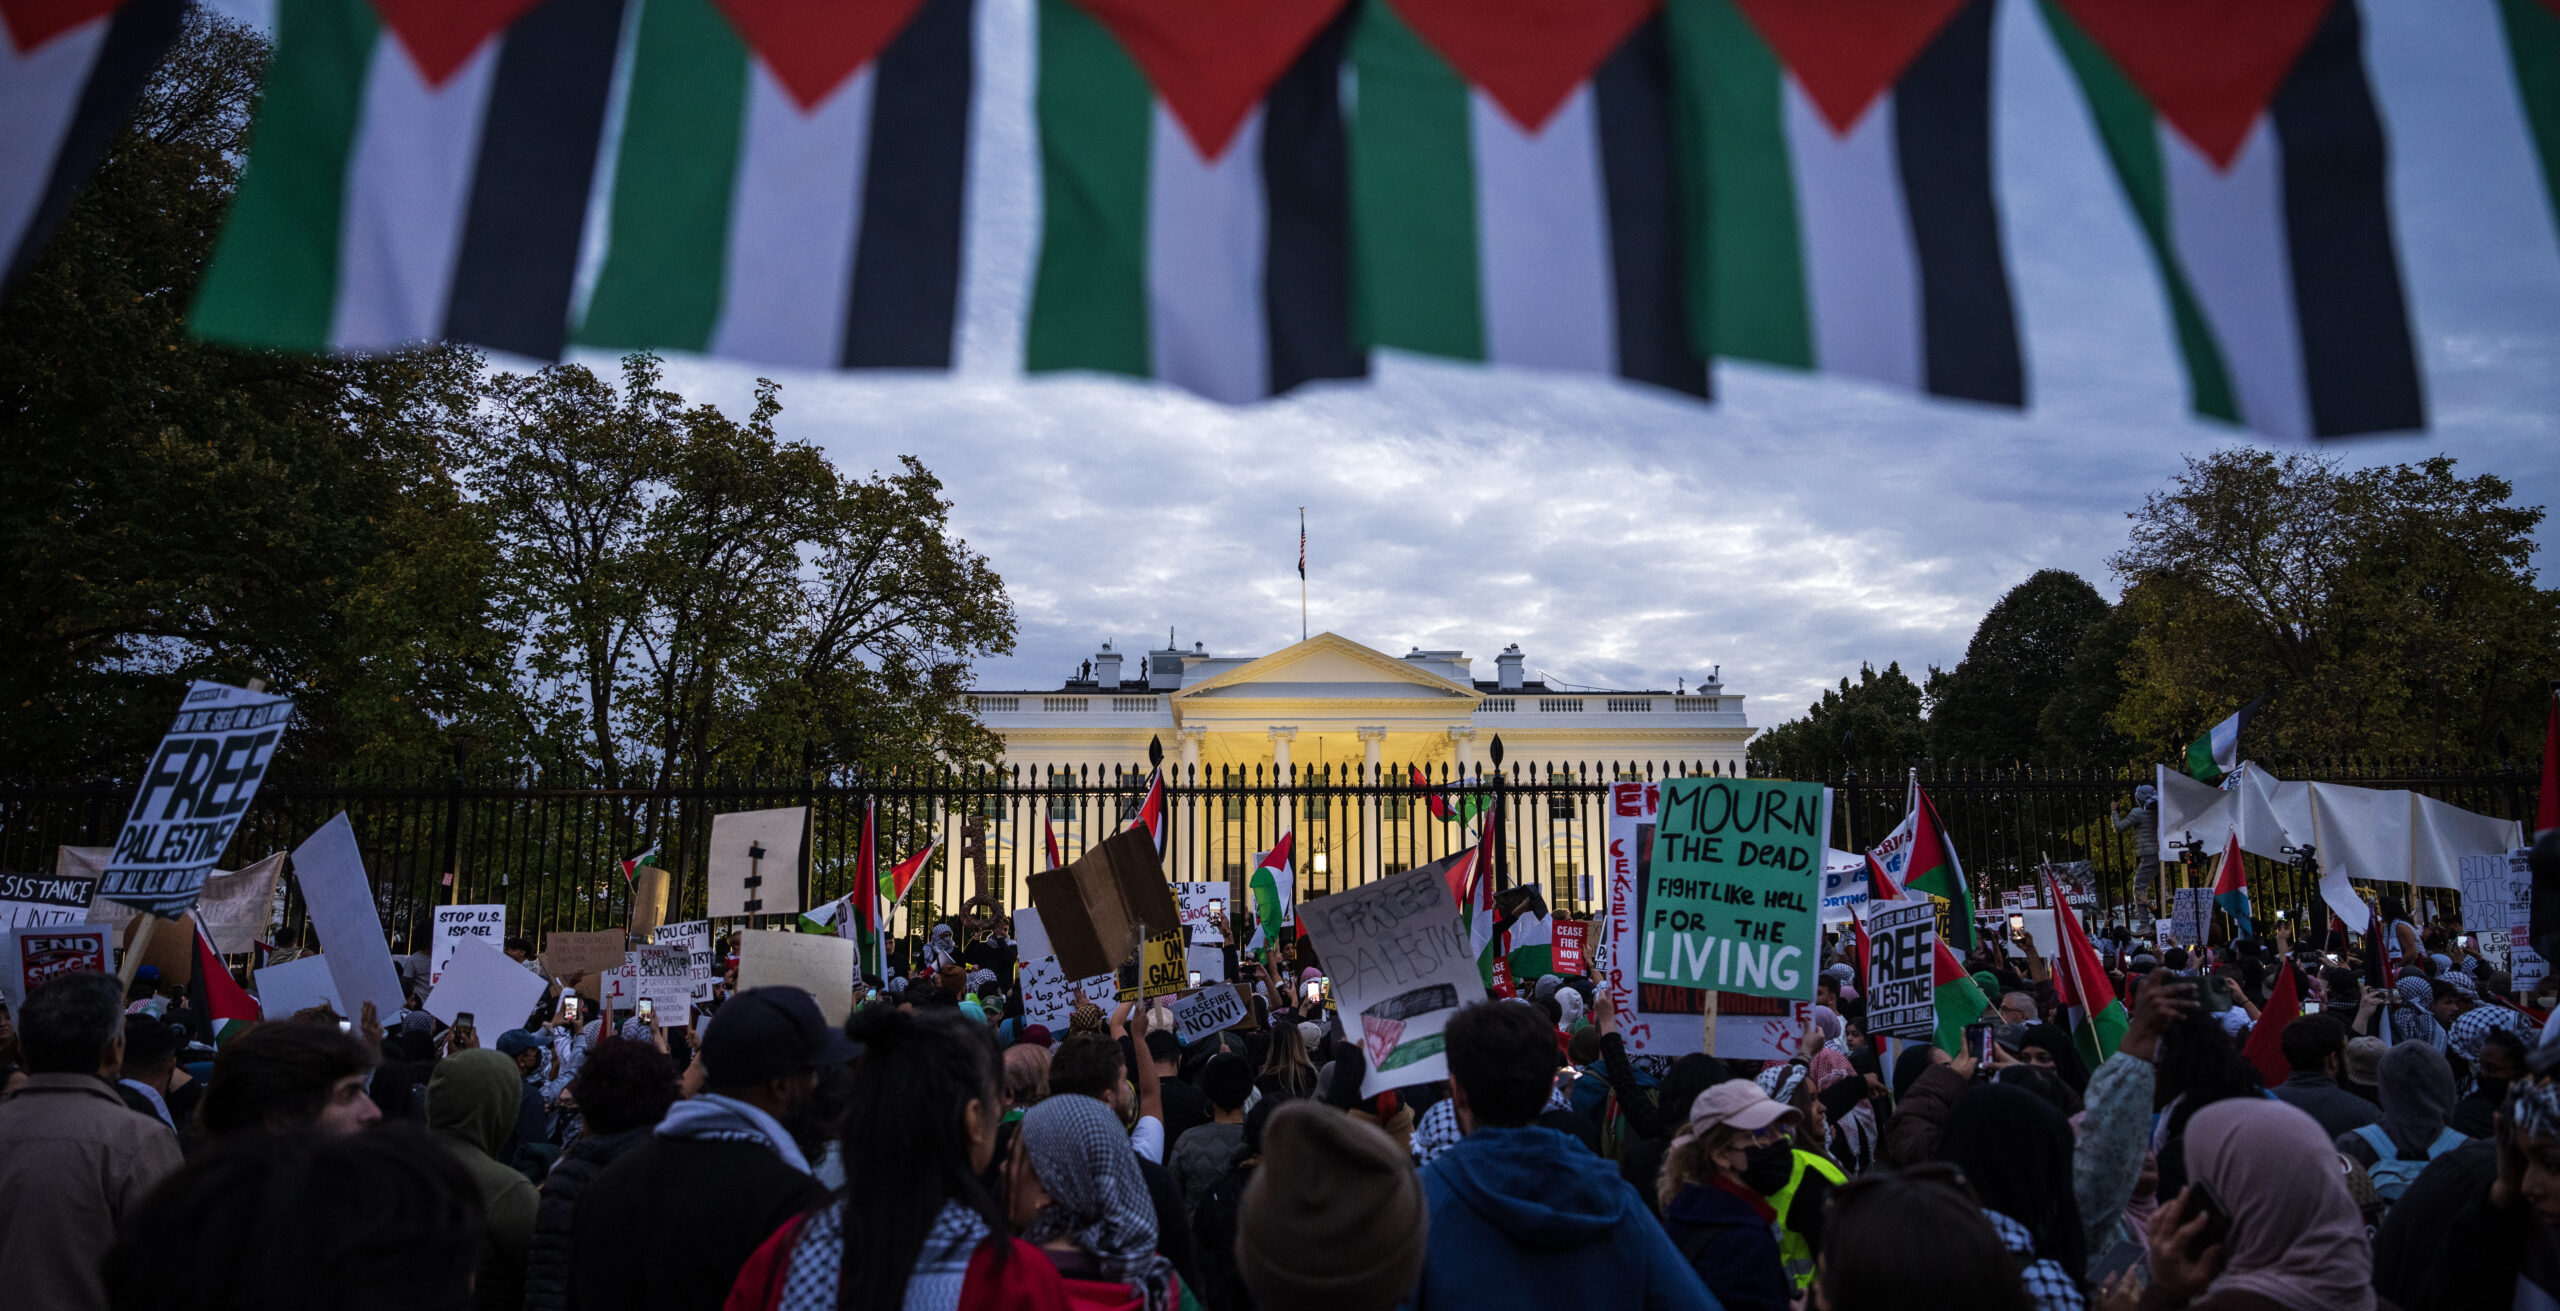 Authorities in DC Preparing to Ensure Safety, Security at 'March for Israel'